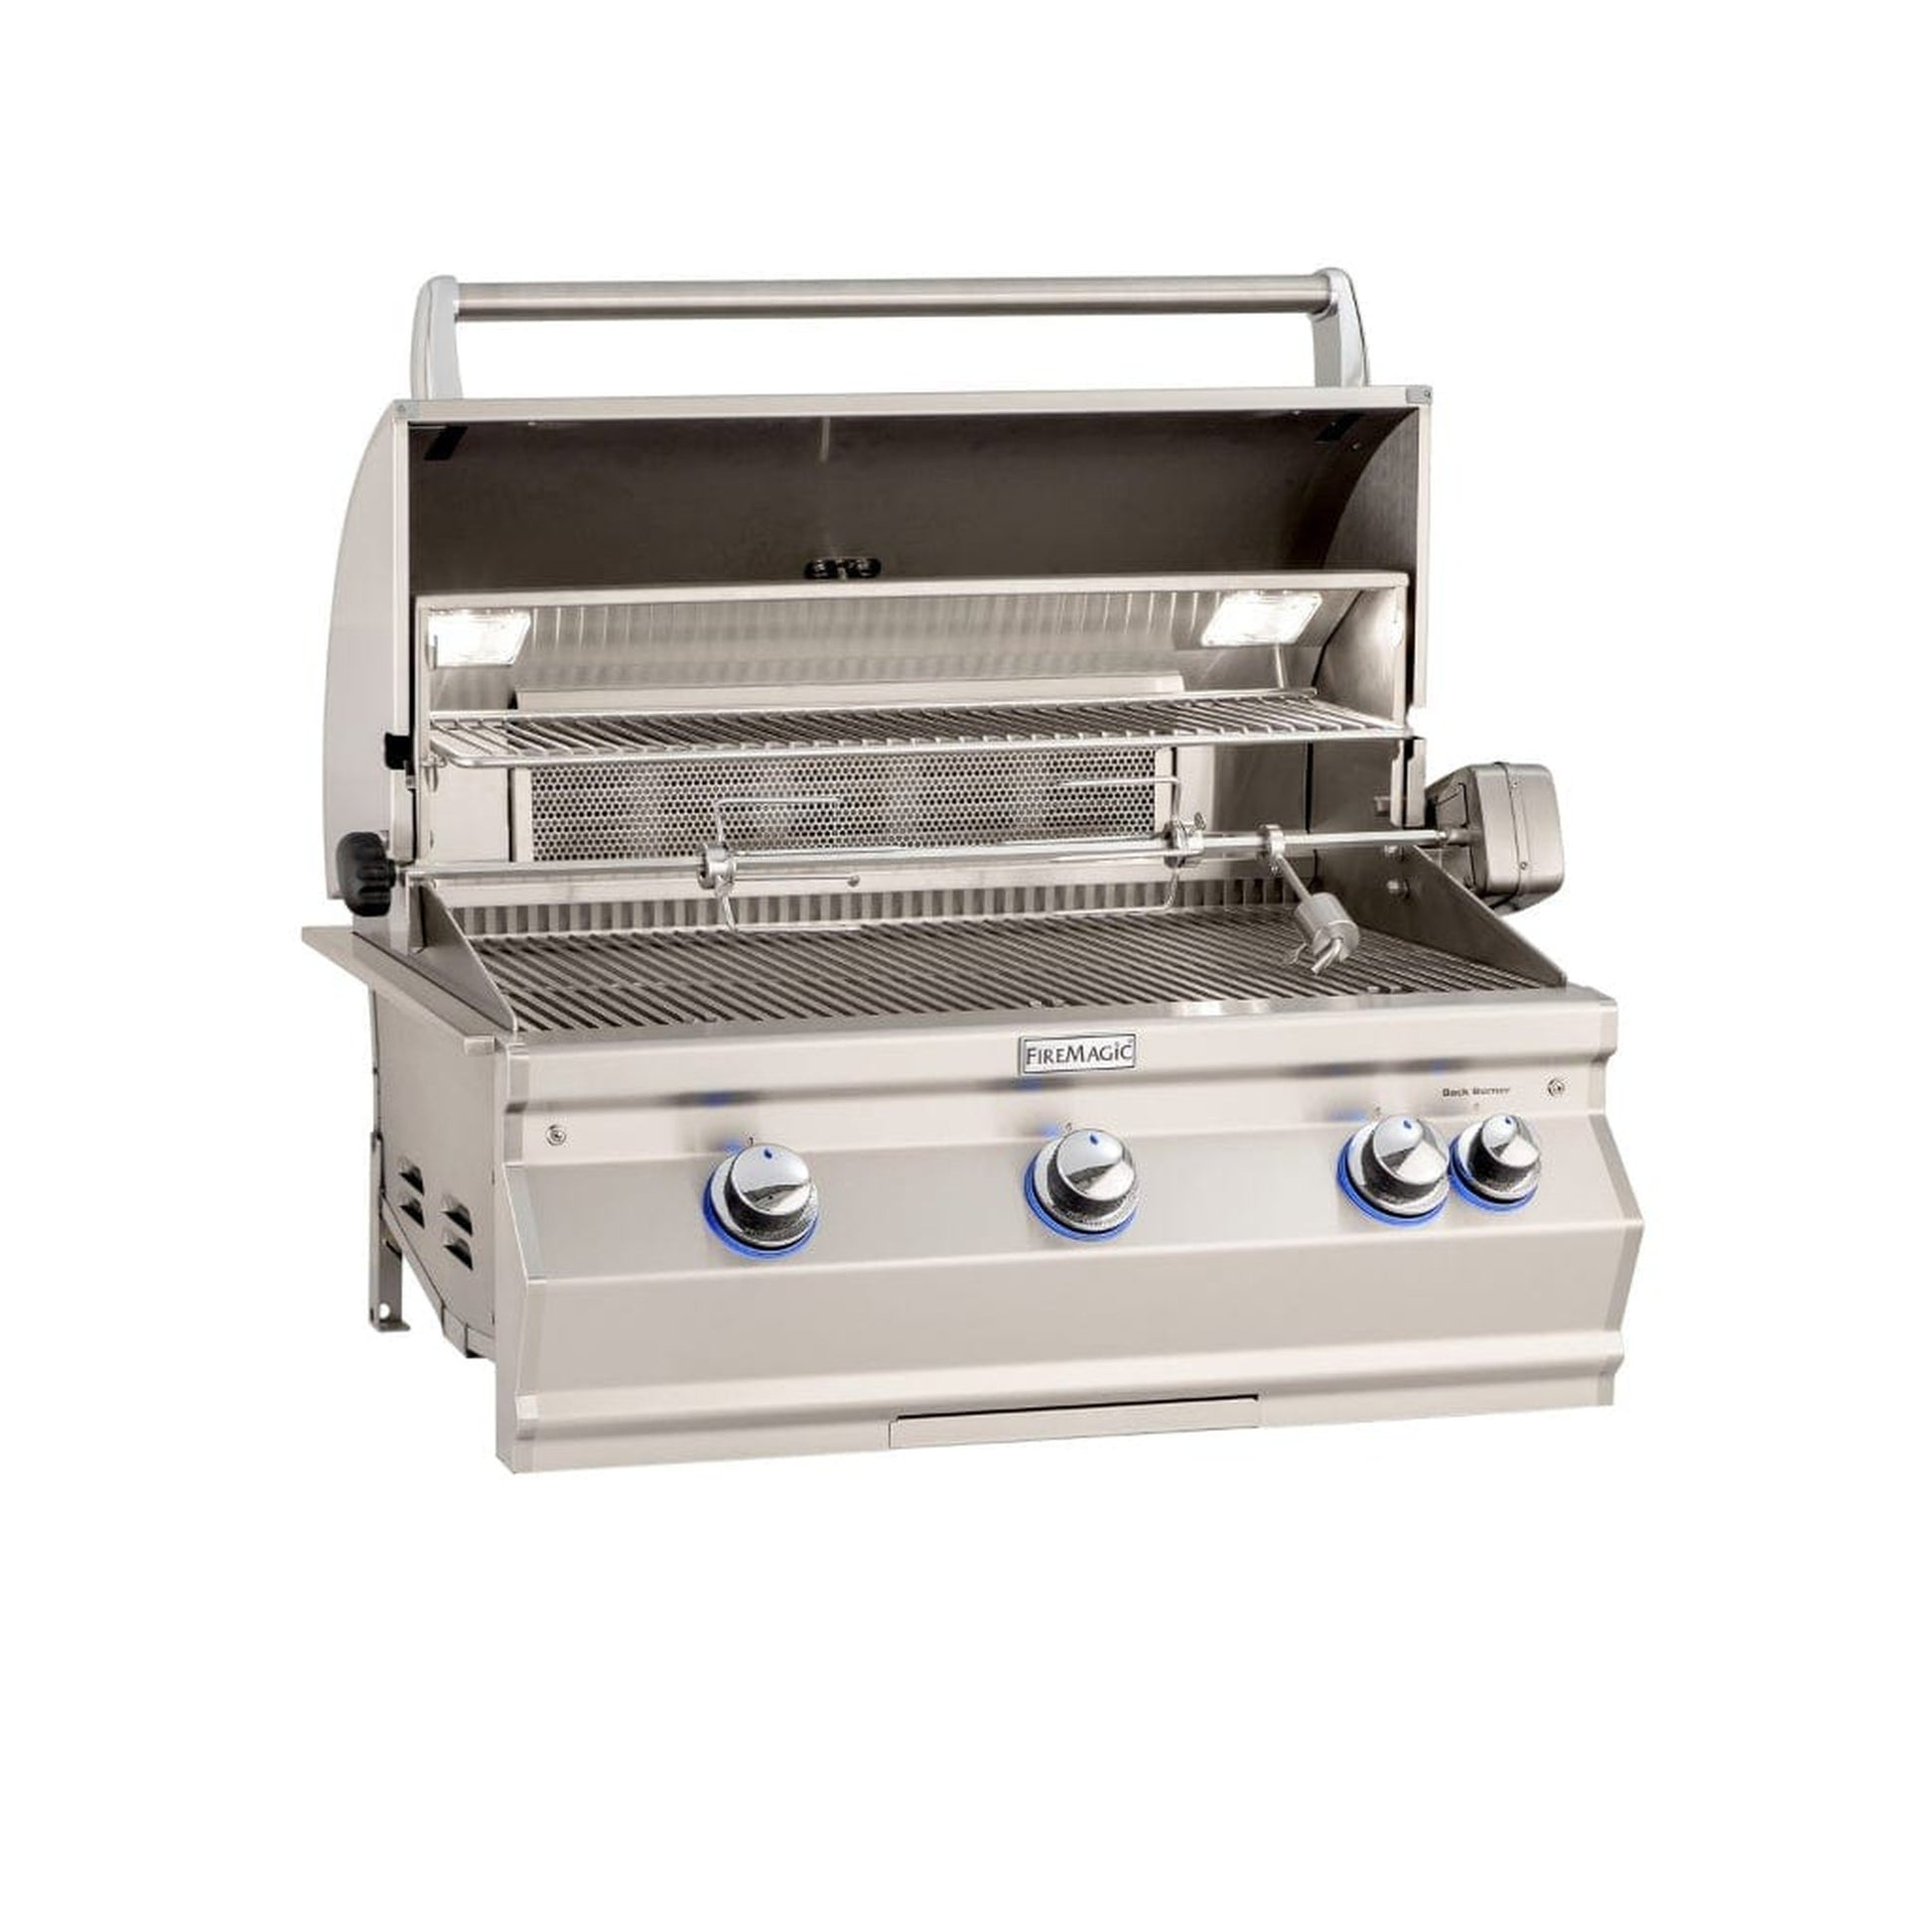 Fire Magic 30" 3-Burner Aurora A540i Built-In Gas Grill w/ Analog Thermometer